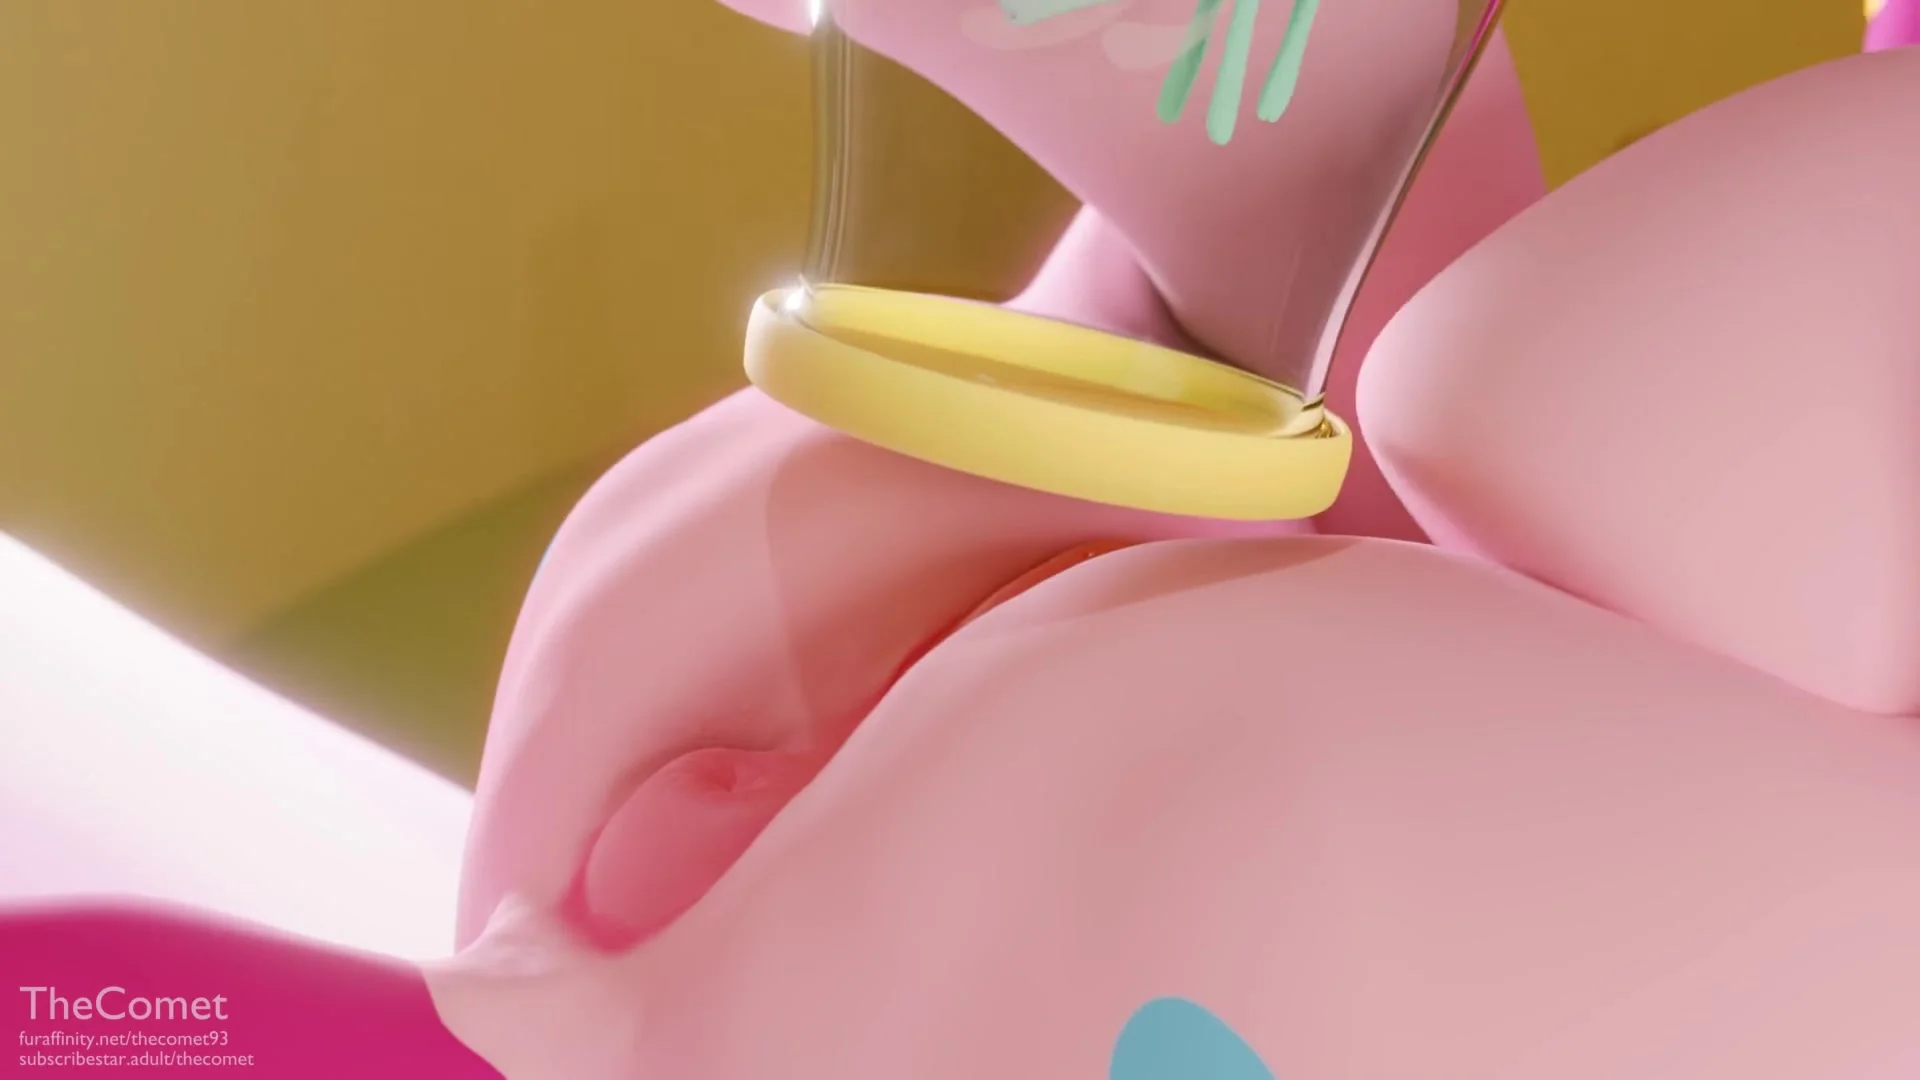 Suit Porn Pinkie Pie - Pinkie Pie farts on and anal vores a fairy - ThisVid.com